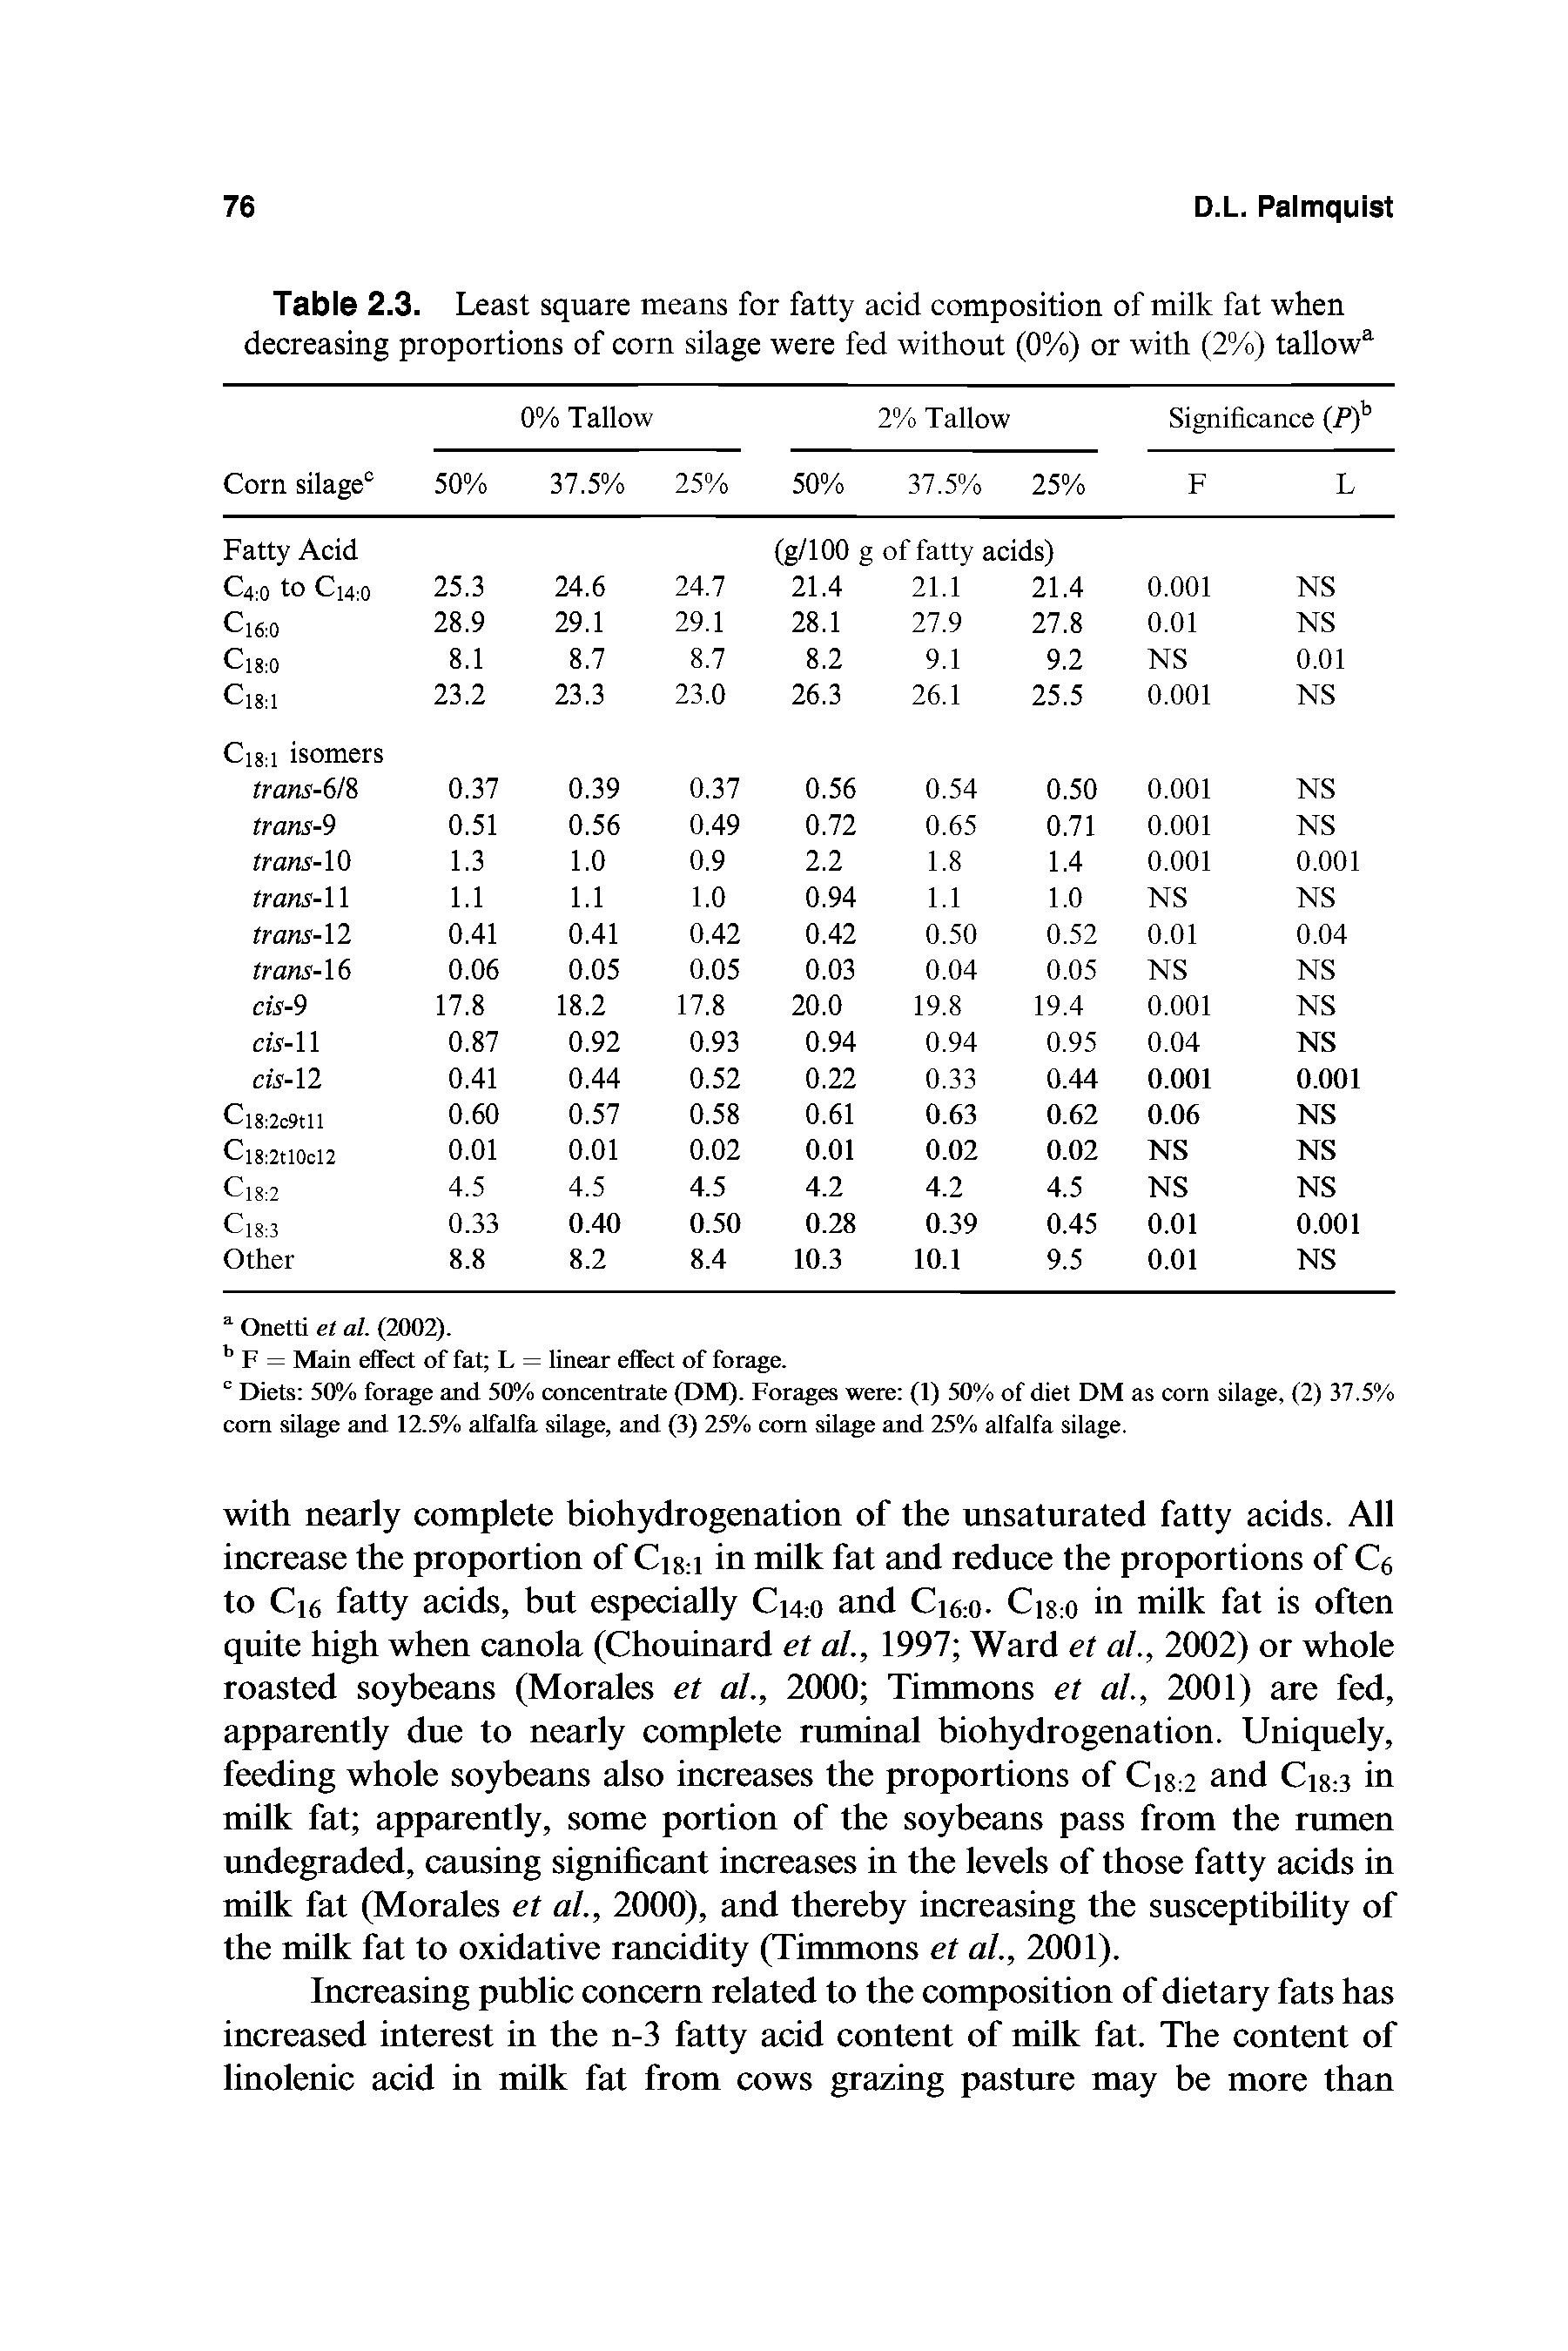 Table 2.3. Least square means for fatty acid composition of milk fat when decreasing proportions of corn silage were fed without (0%) or with (2%) tallowa...